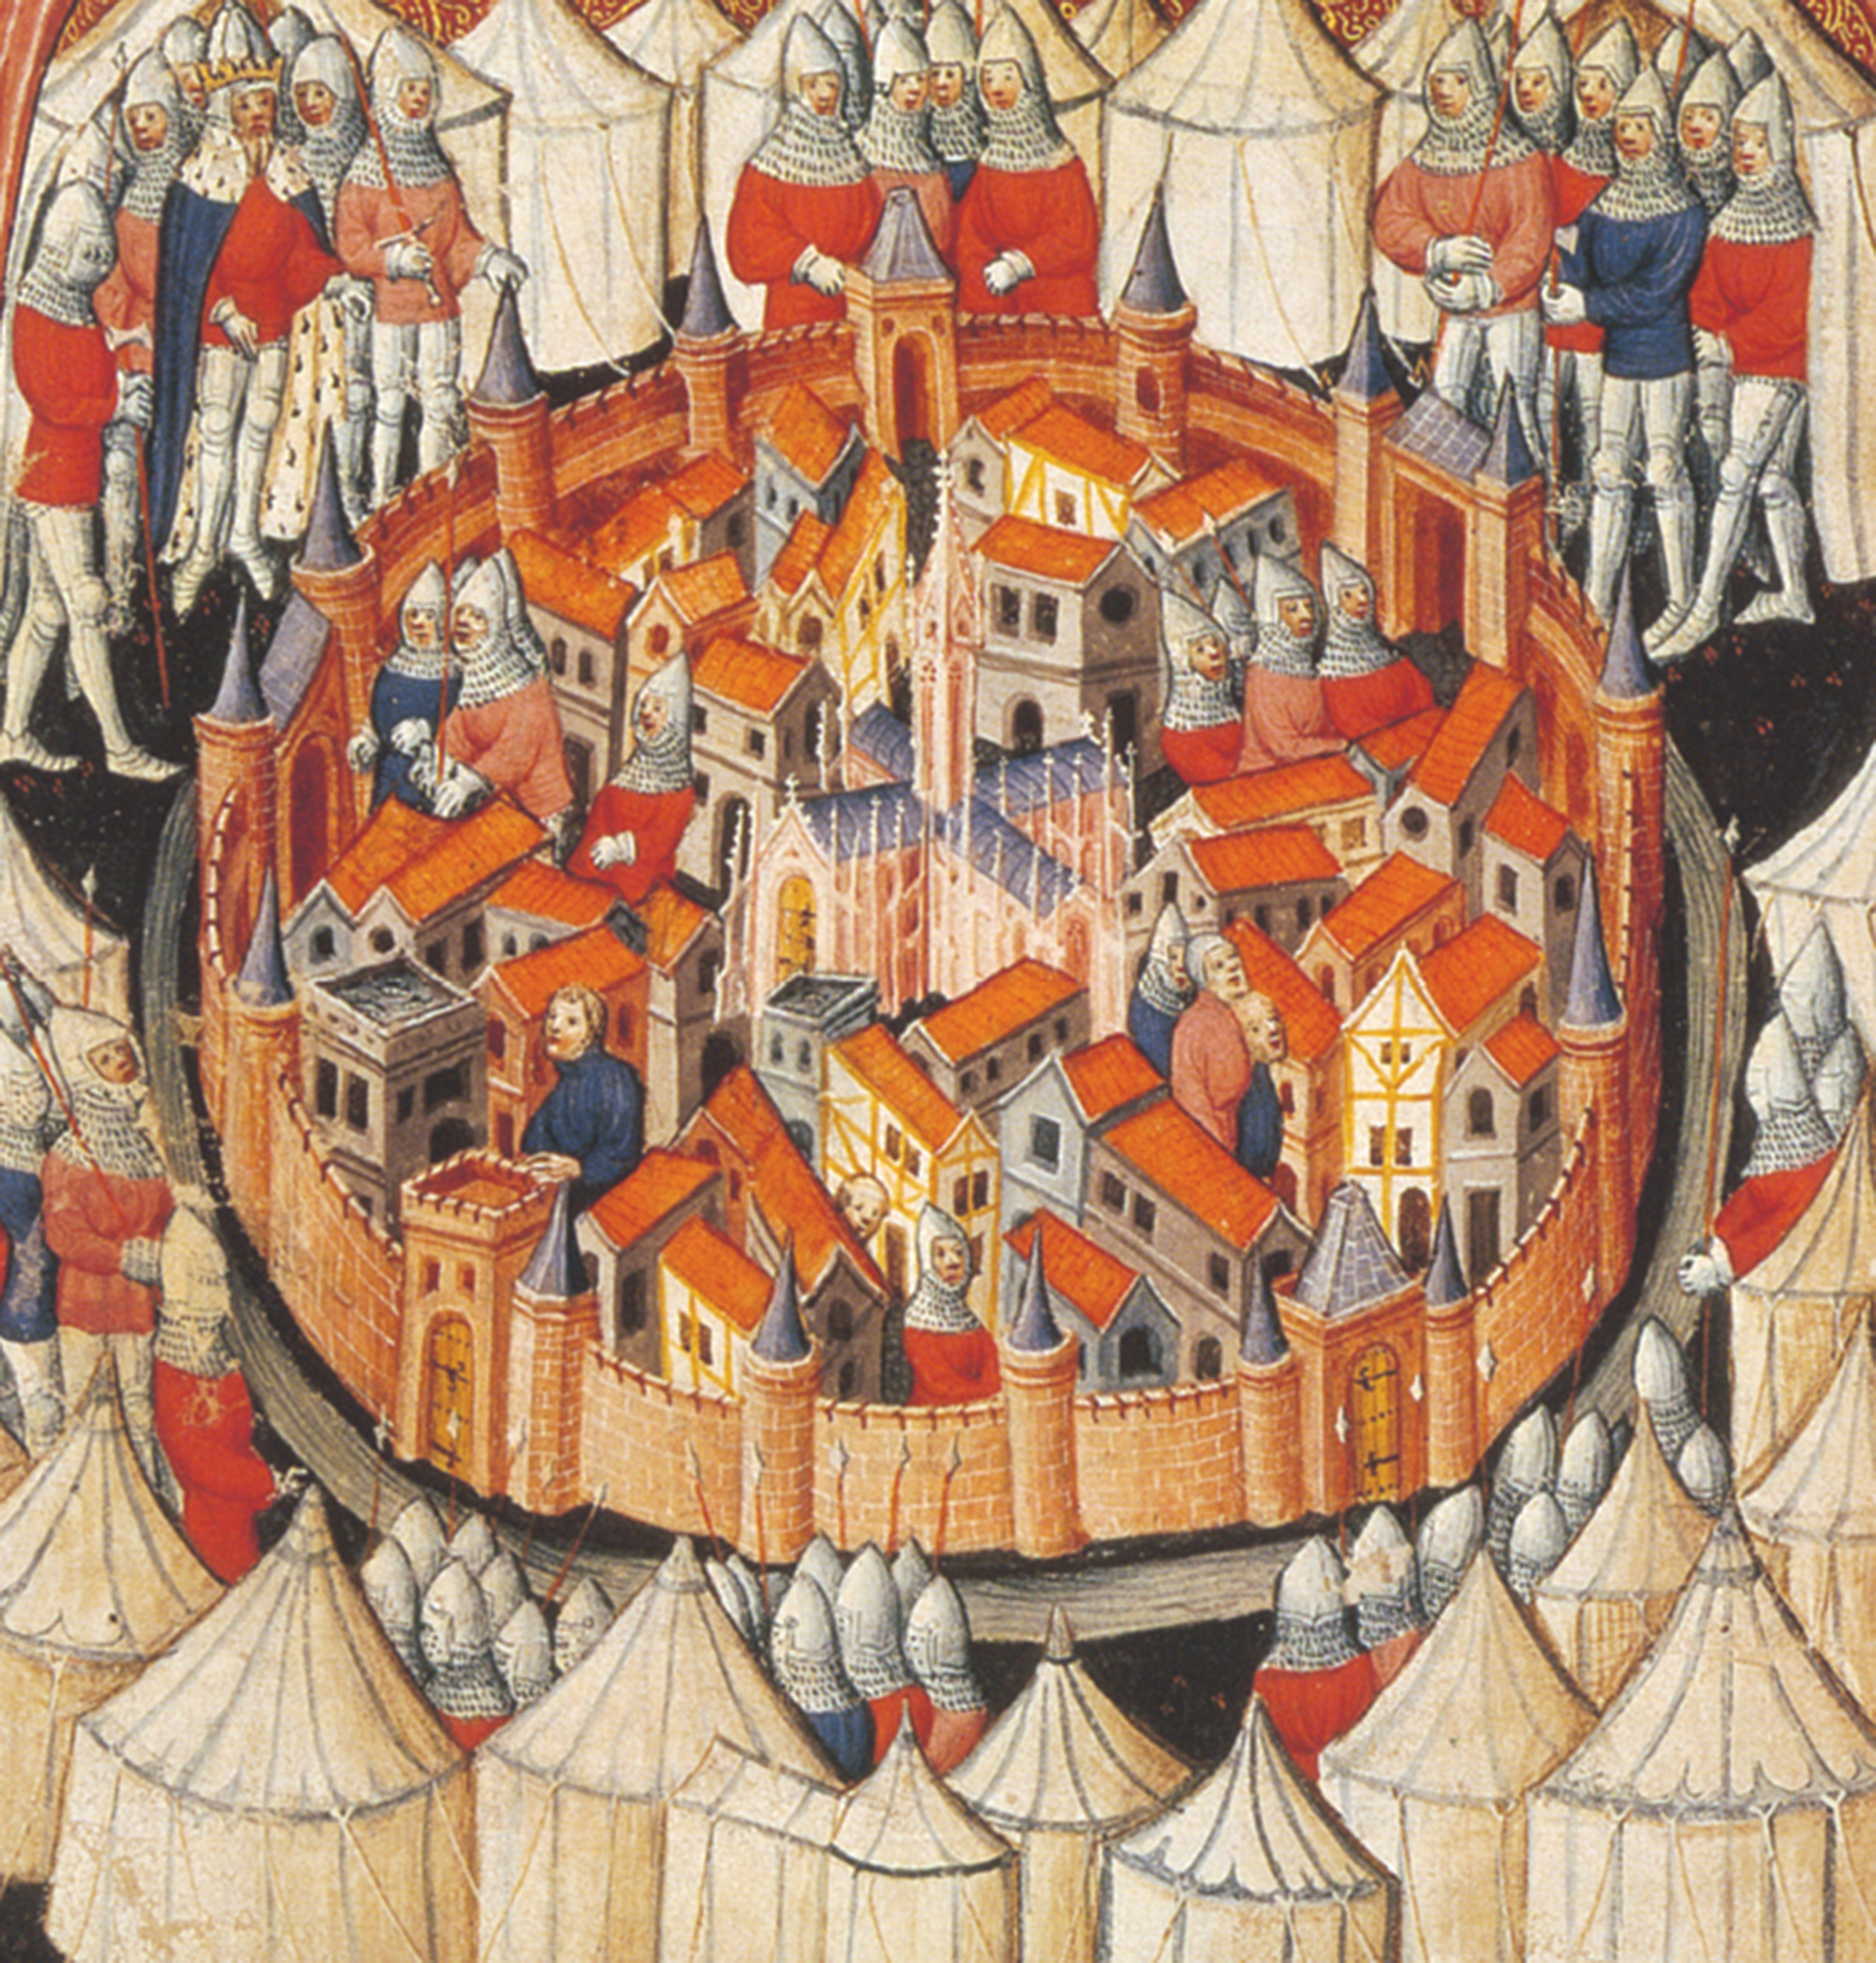 A detail from an early fifteenth-century illuminated manuscript depicting Jerusalem as a walled city besieged by crusaders. 